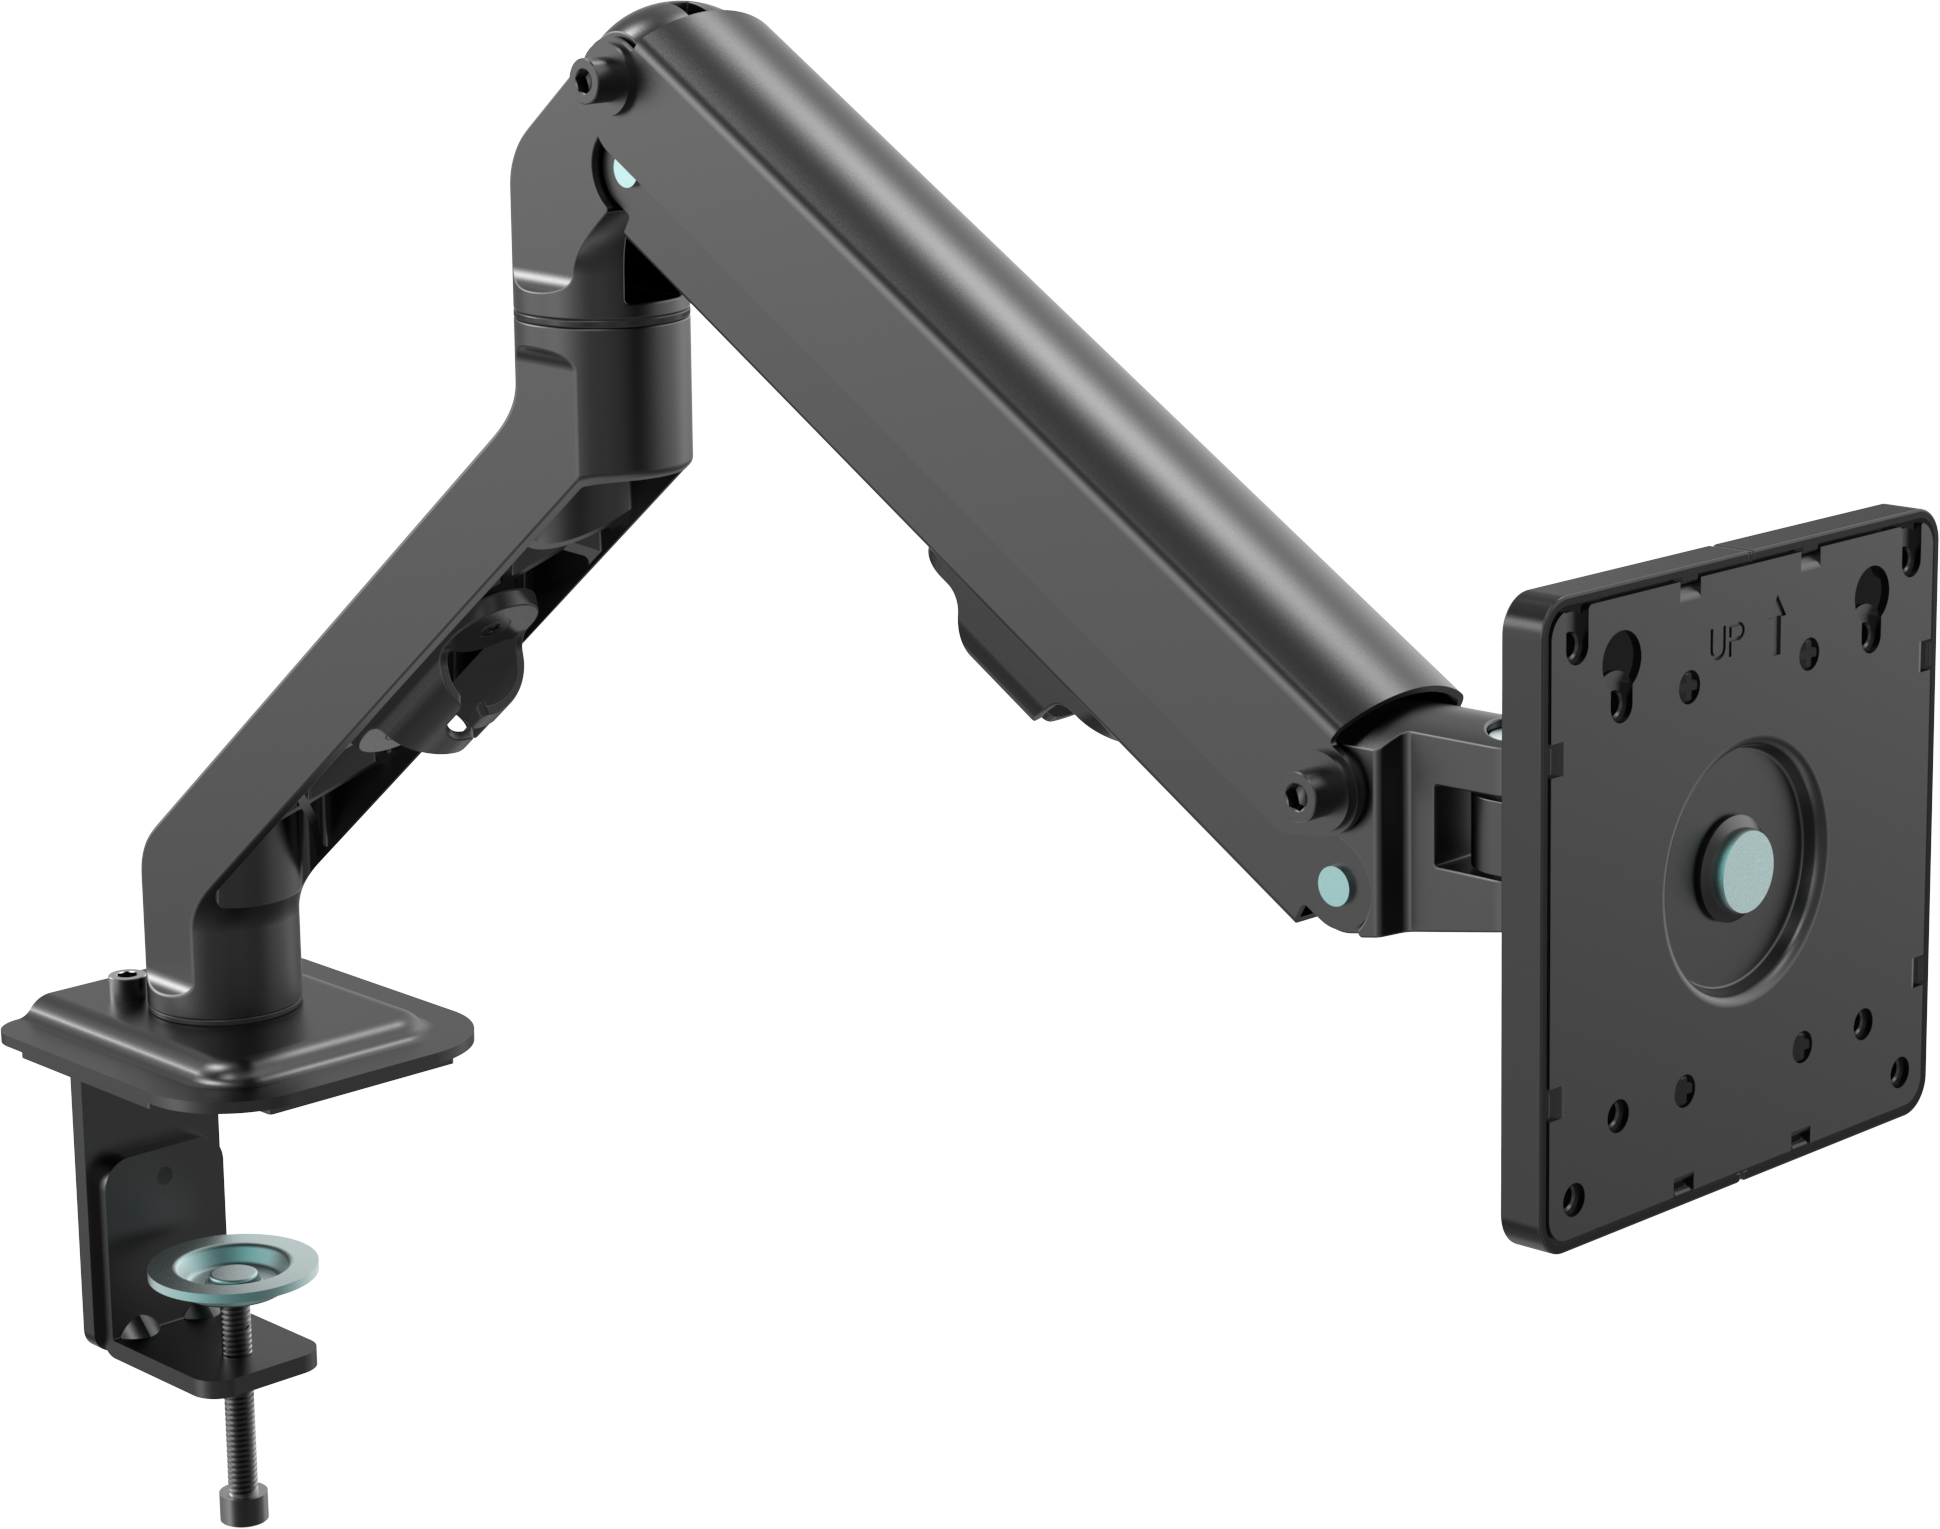 An image showing Black Monitor Desk Arm 100×100